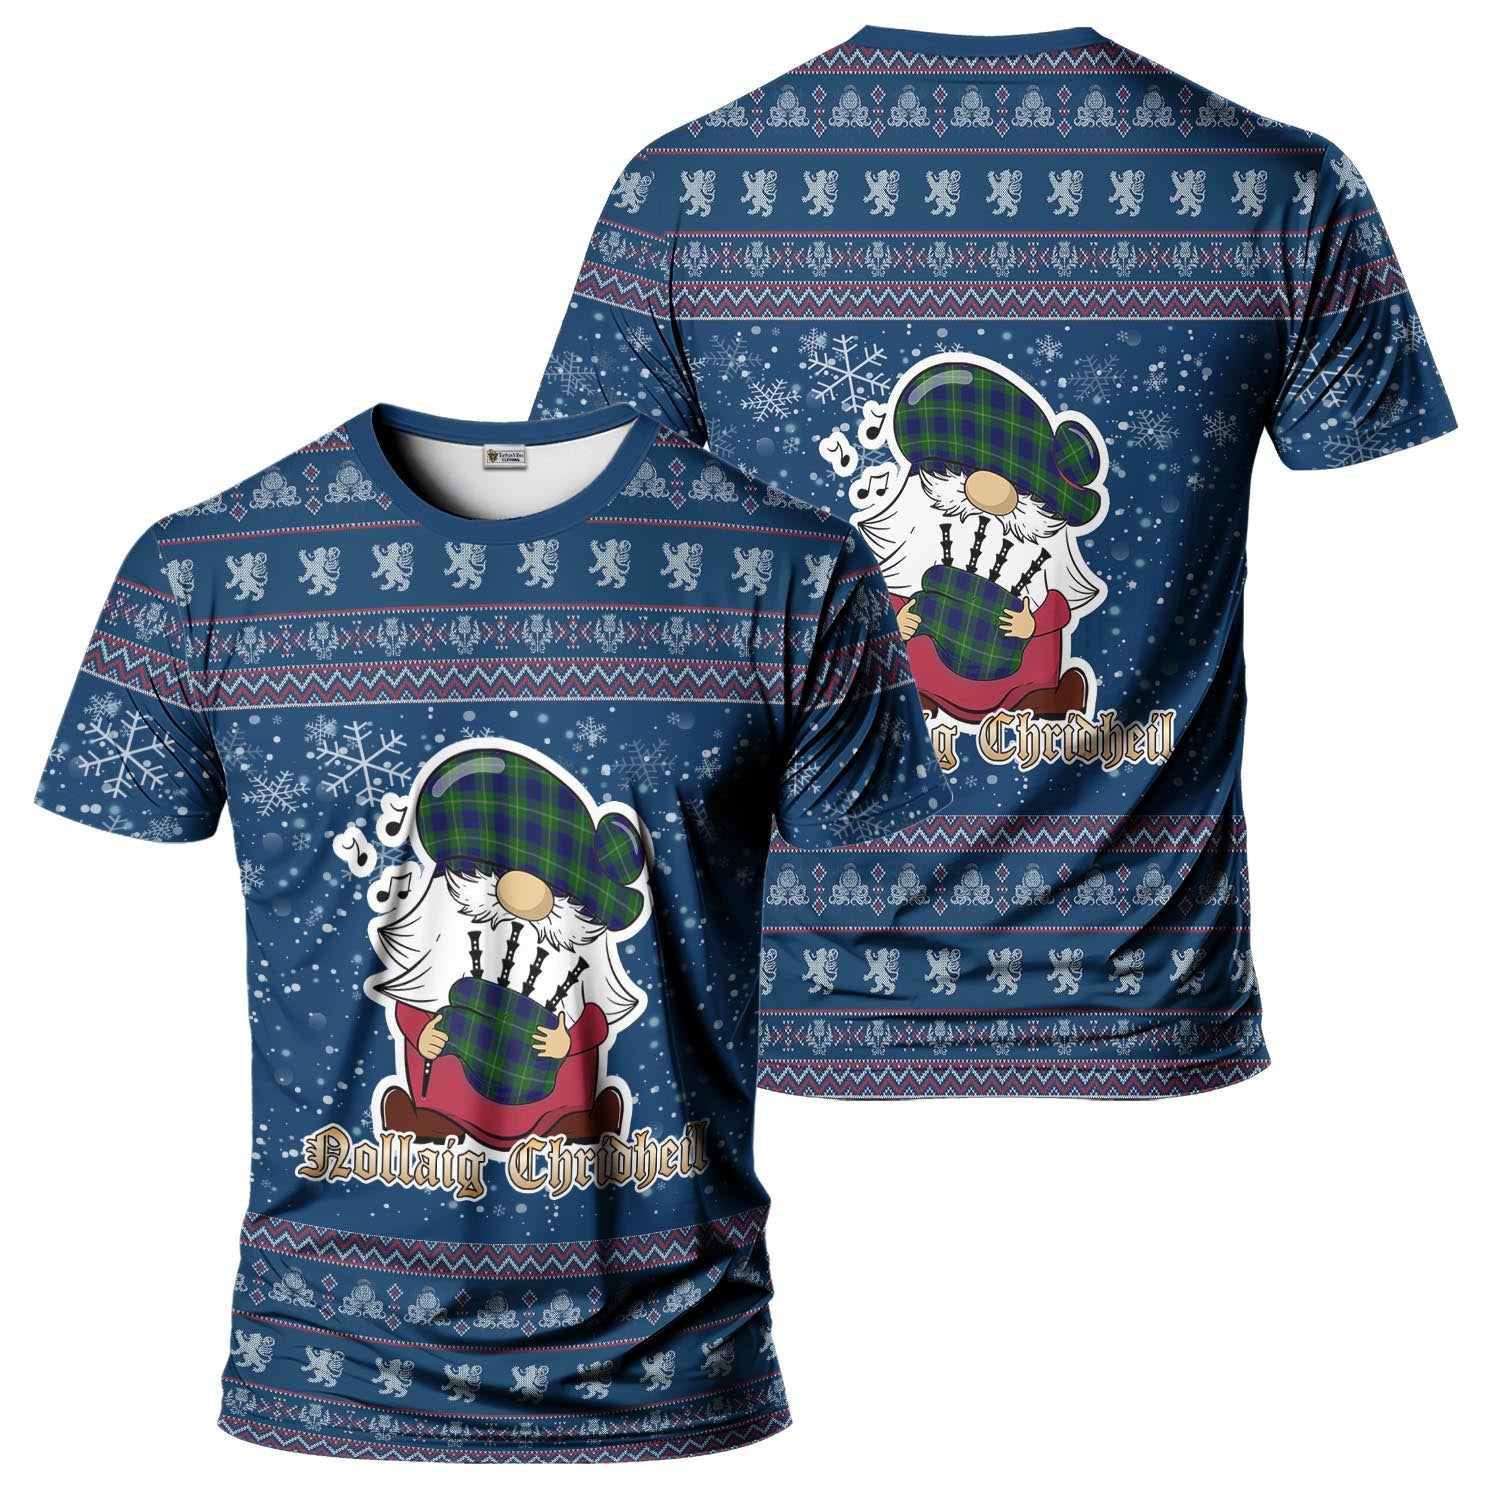 Oliphant Modern Clan Christmas Family T-Shirt with Funny Gnome Playing Bagpipes Kid's Shirt Blue - Tartanvibesclothing